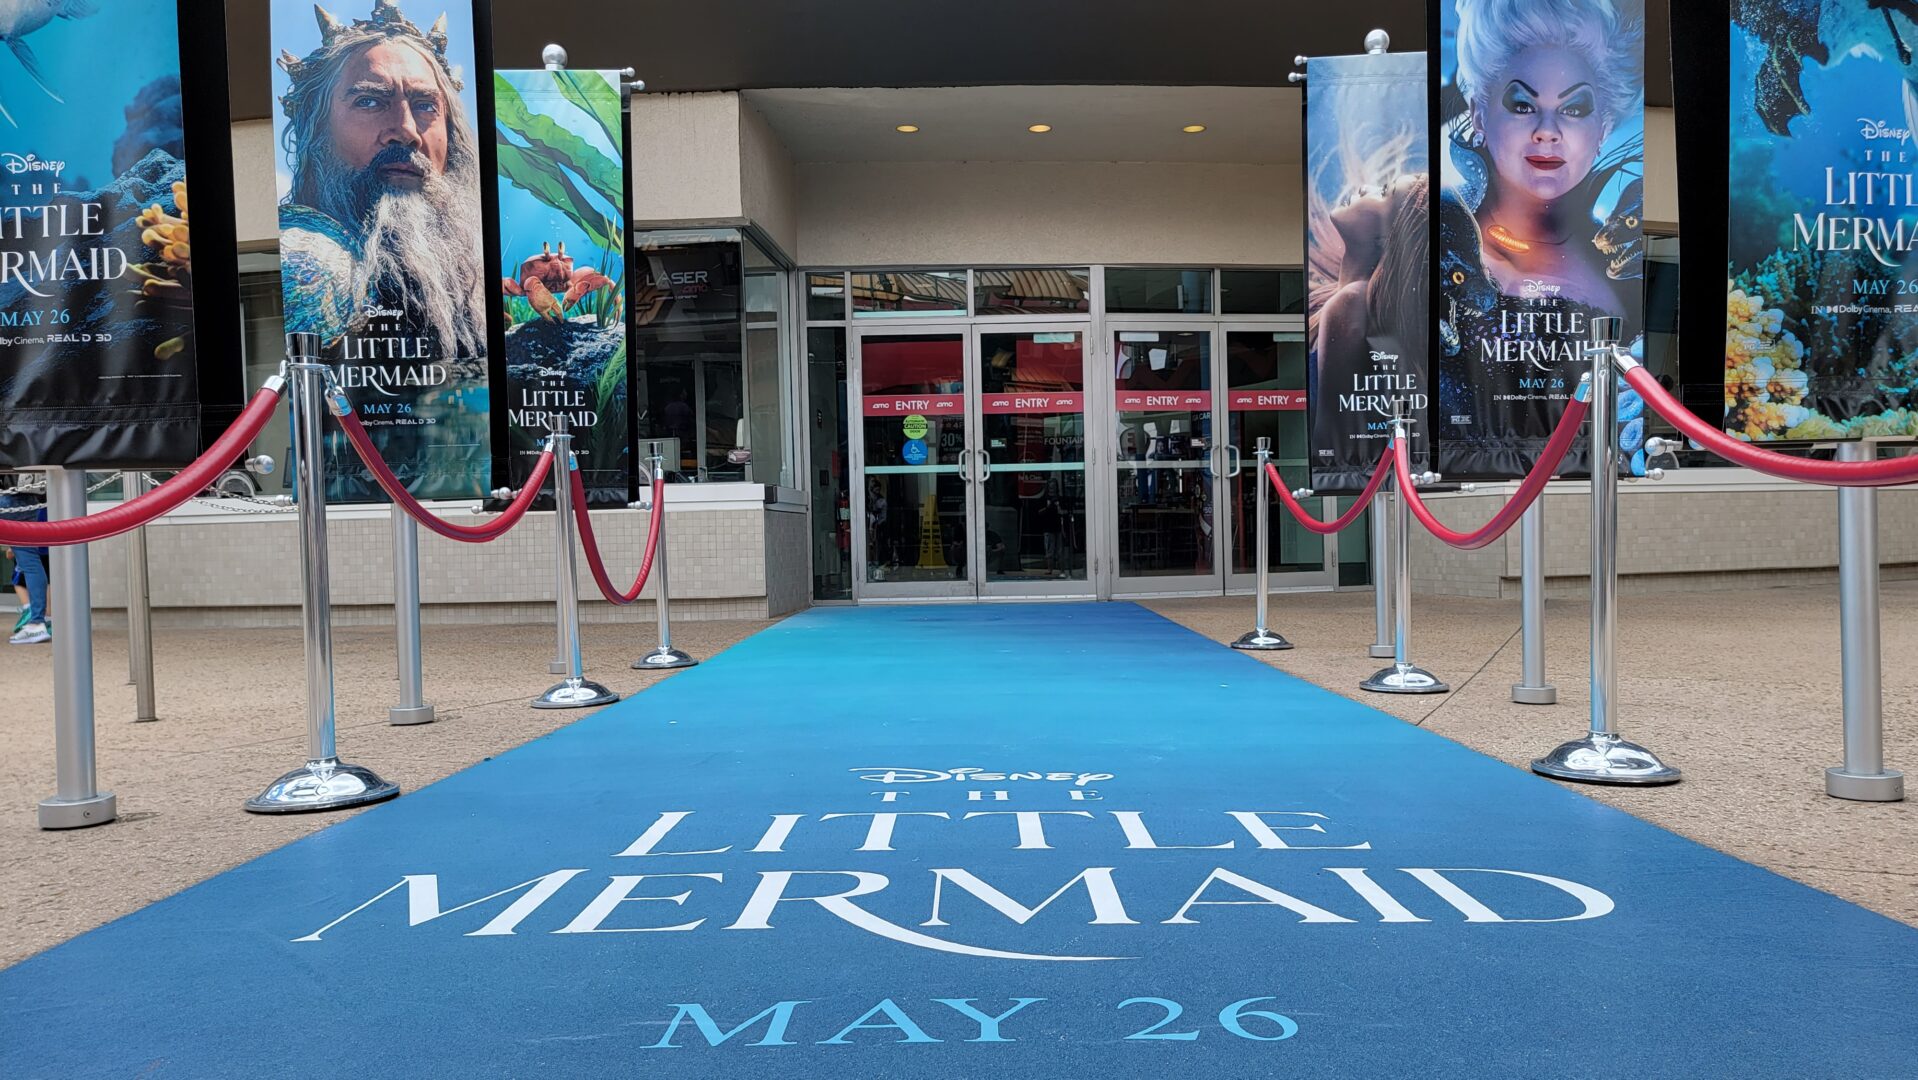 AMC Theaters in Disney Springs Decorated for Live-Action Little Mermaid